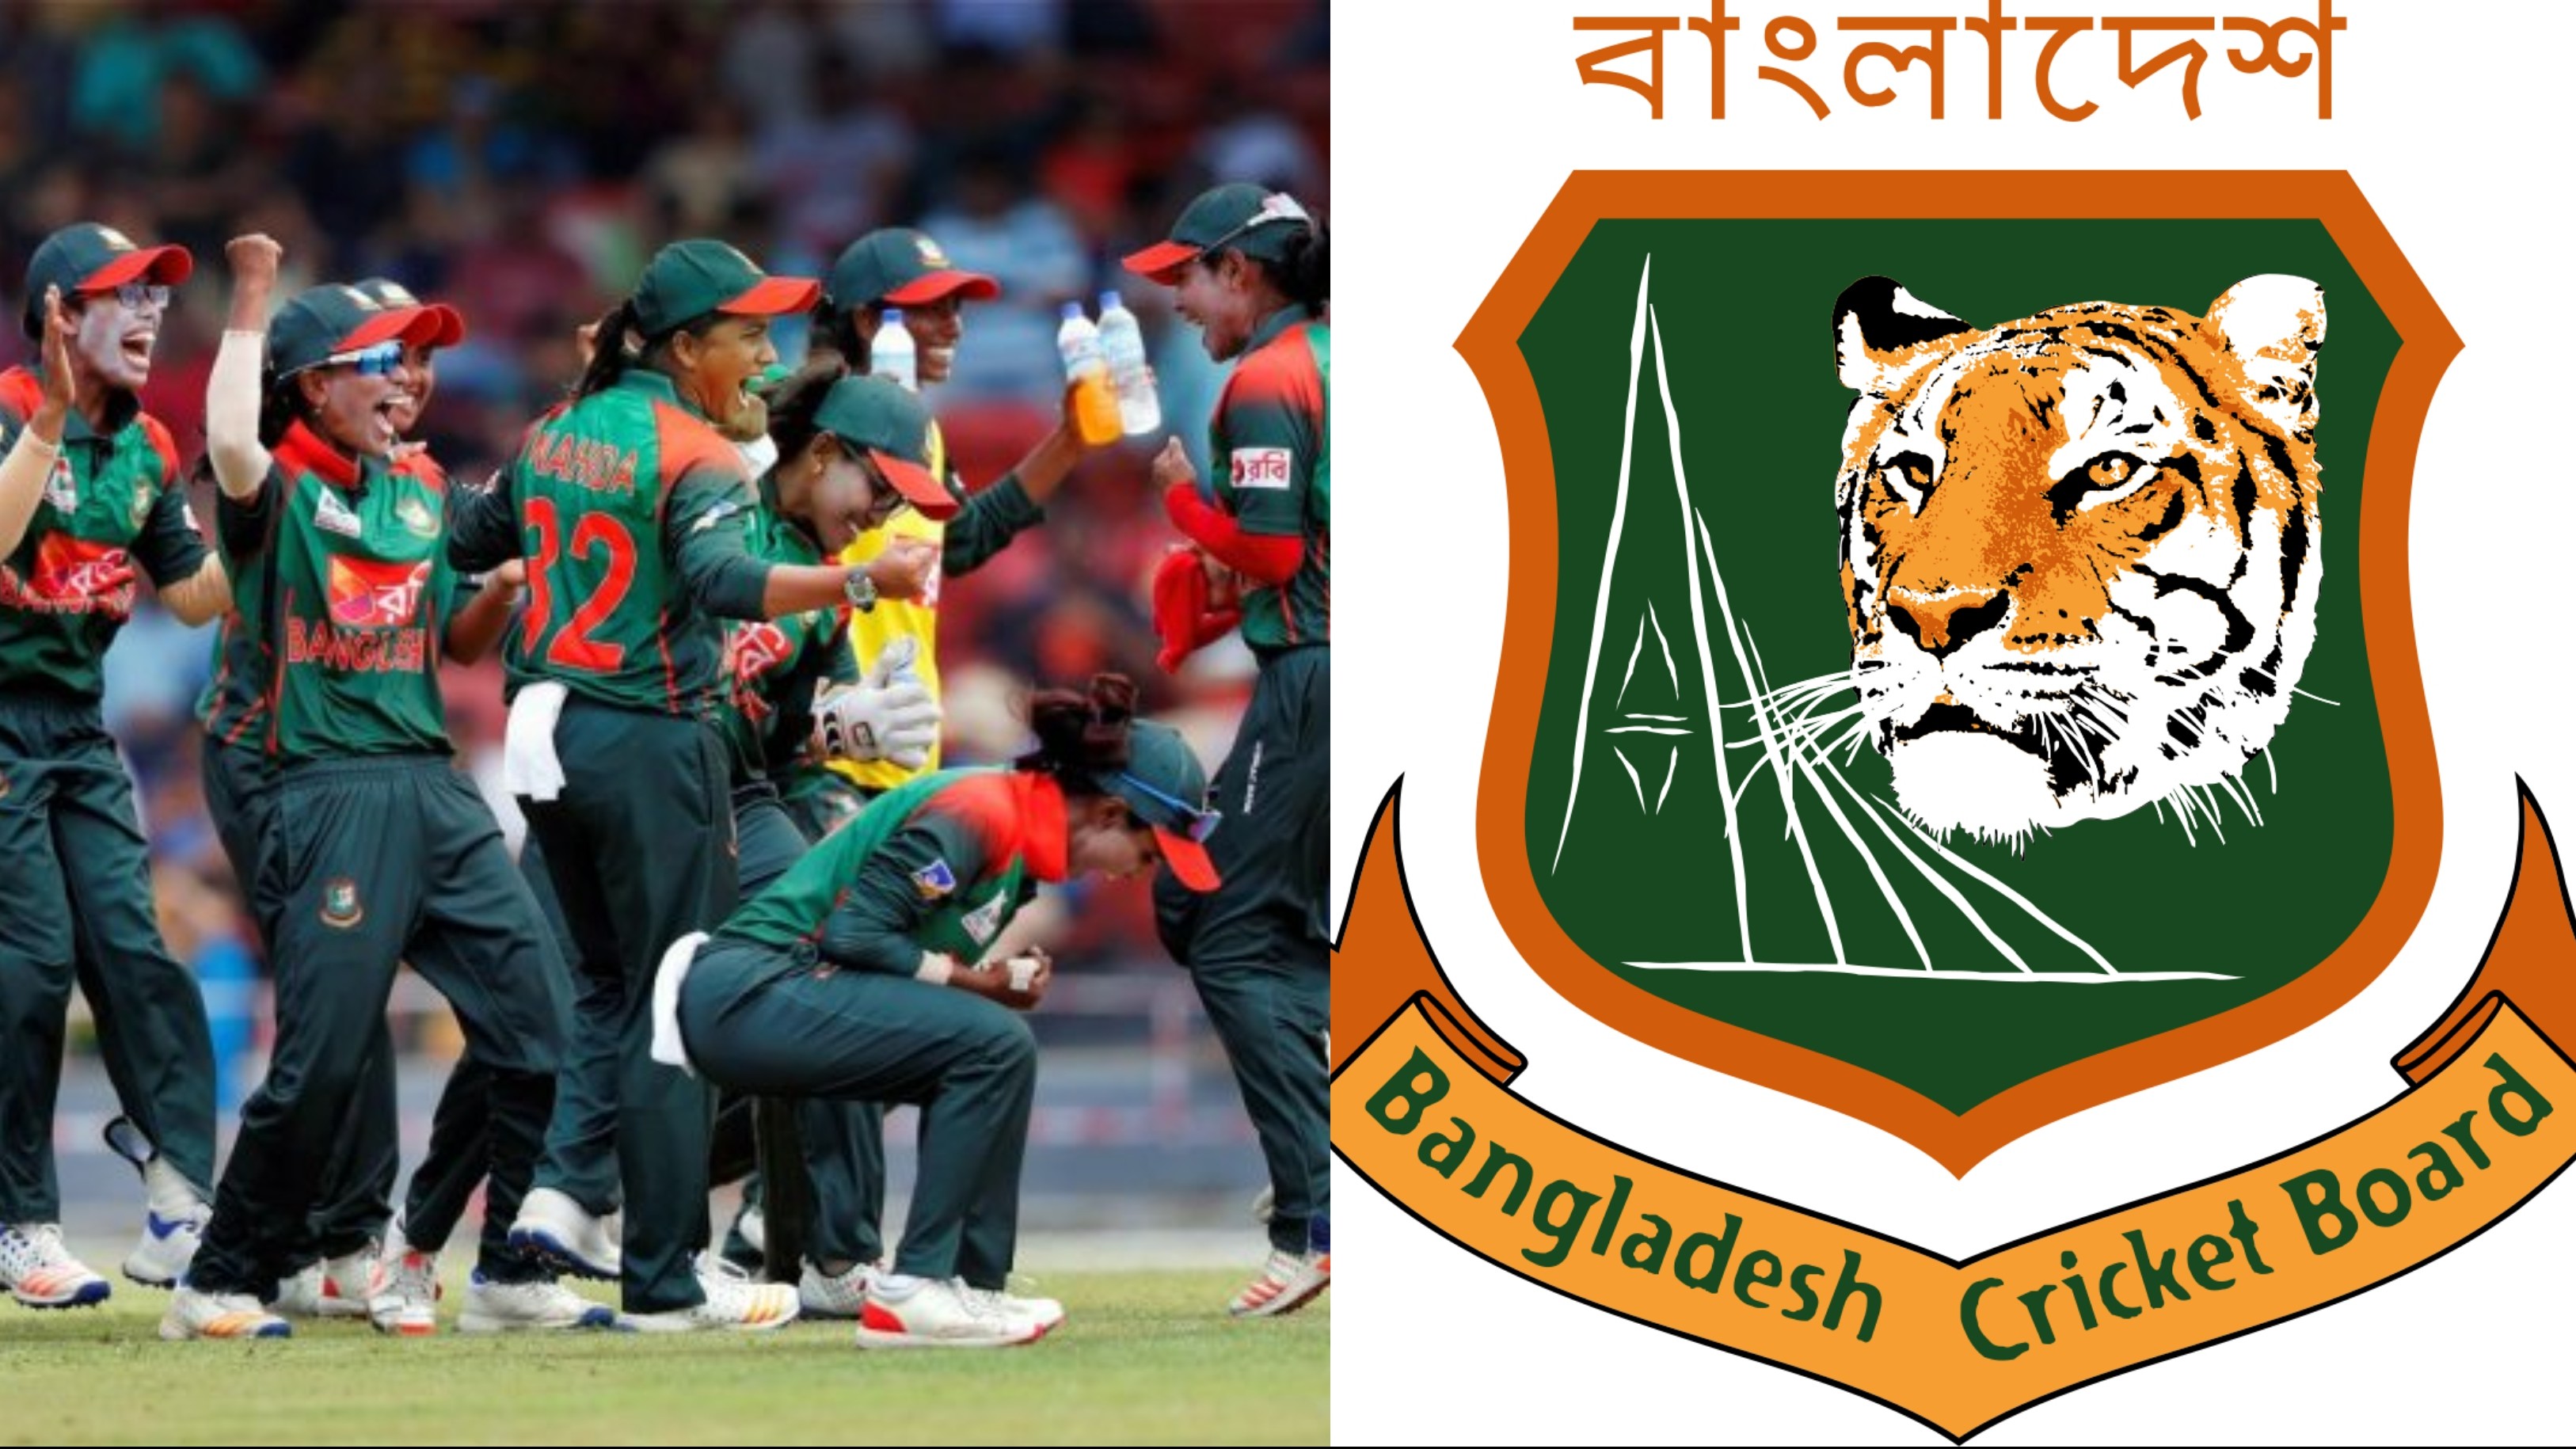 BCB announces financial aid for their women cricketers to cope with COVID-19 shutdown